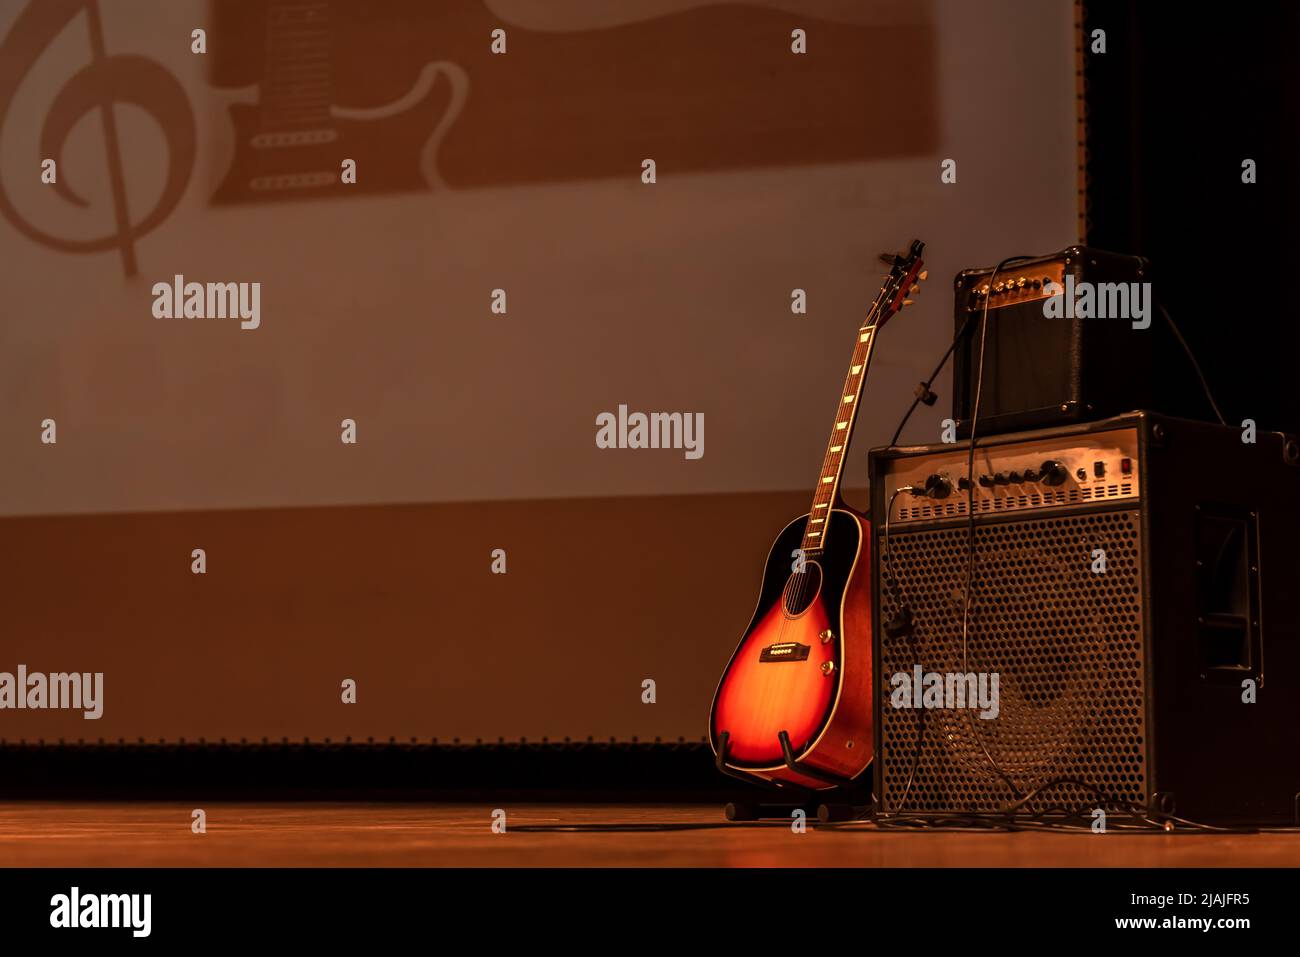 acoustic guitar on guitar stand with two amplifiers next to it im spain Stock Photo